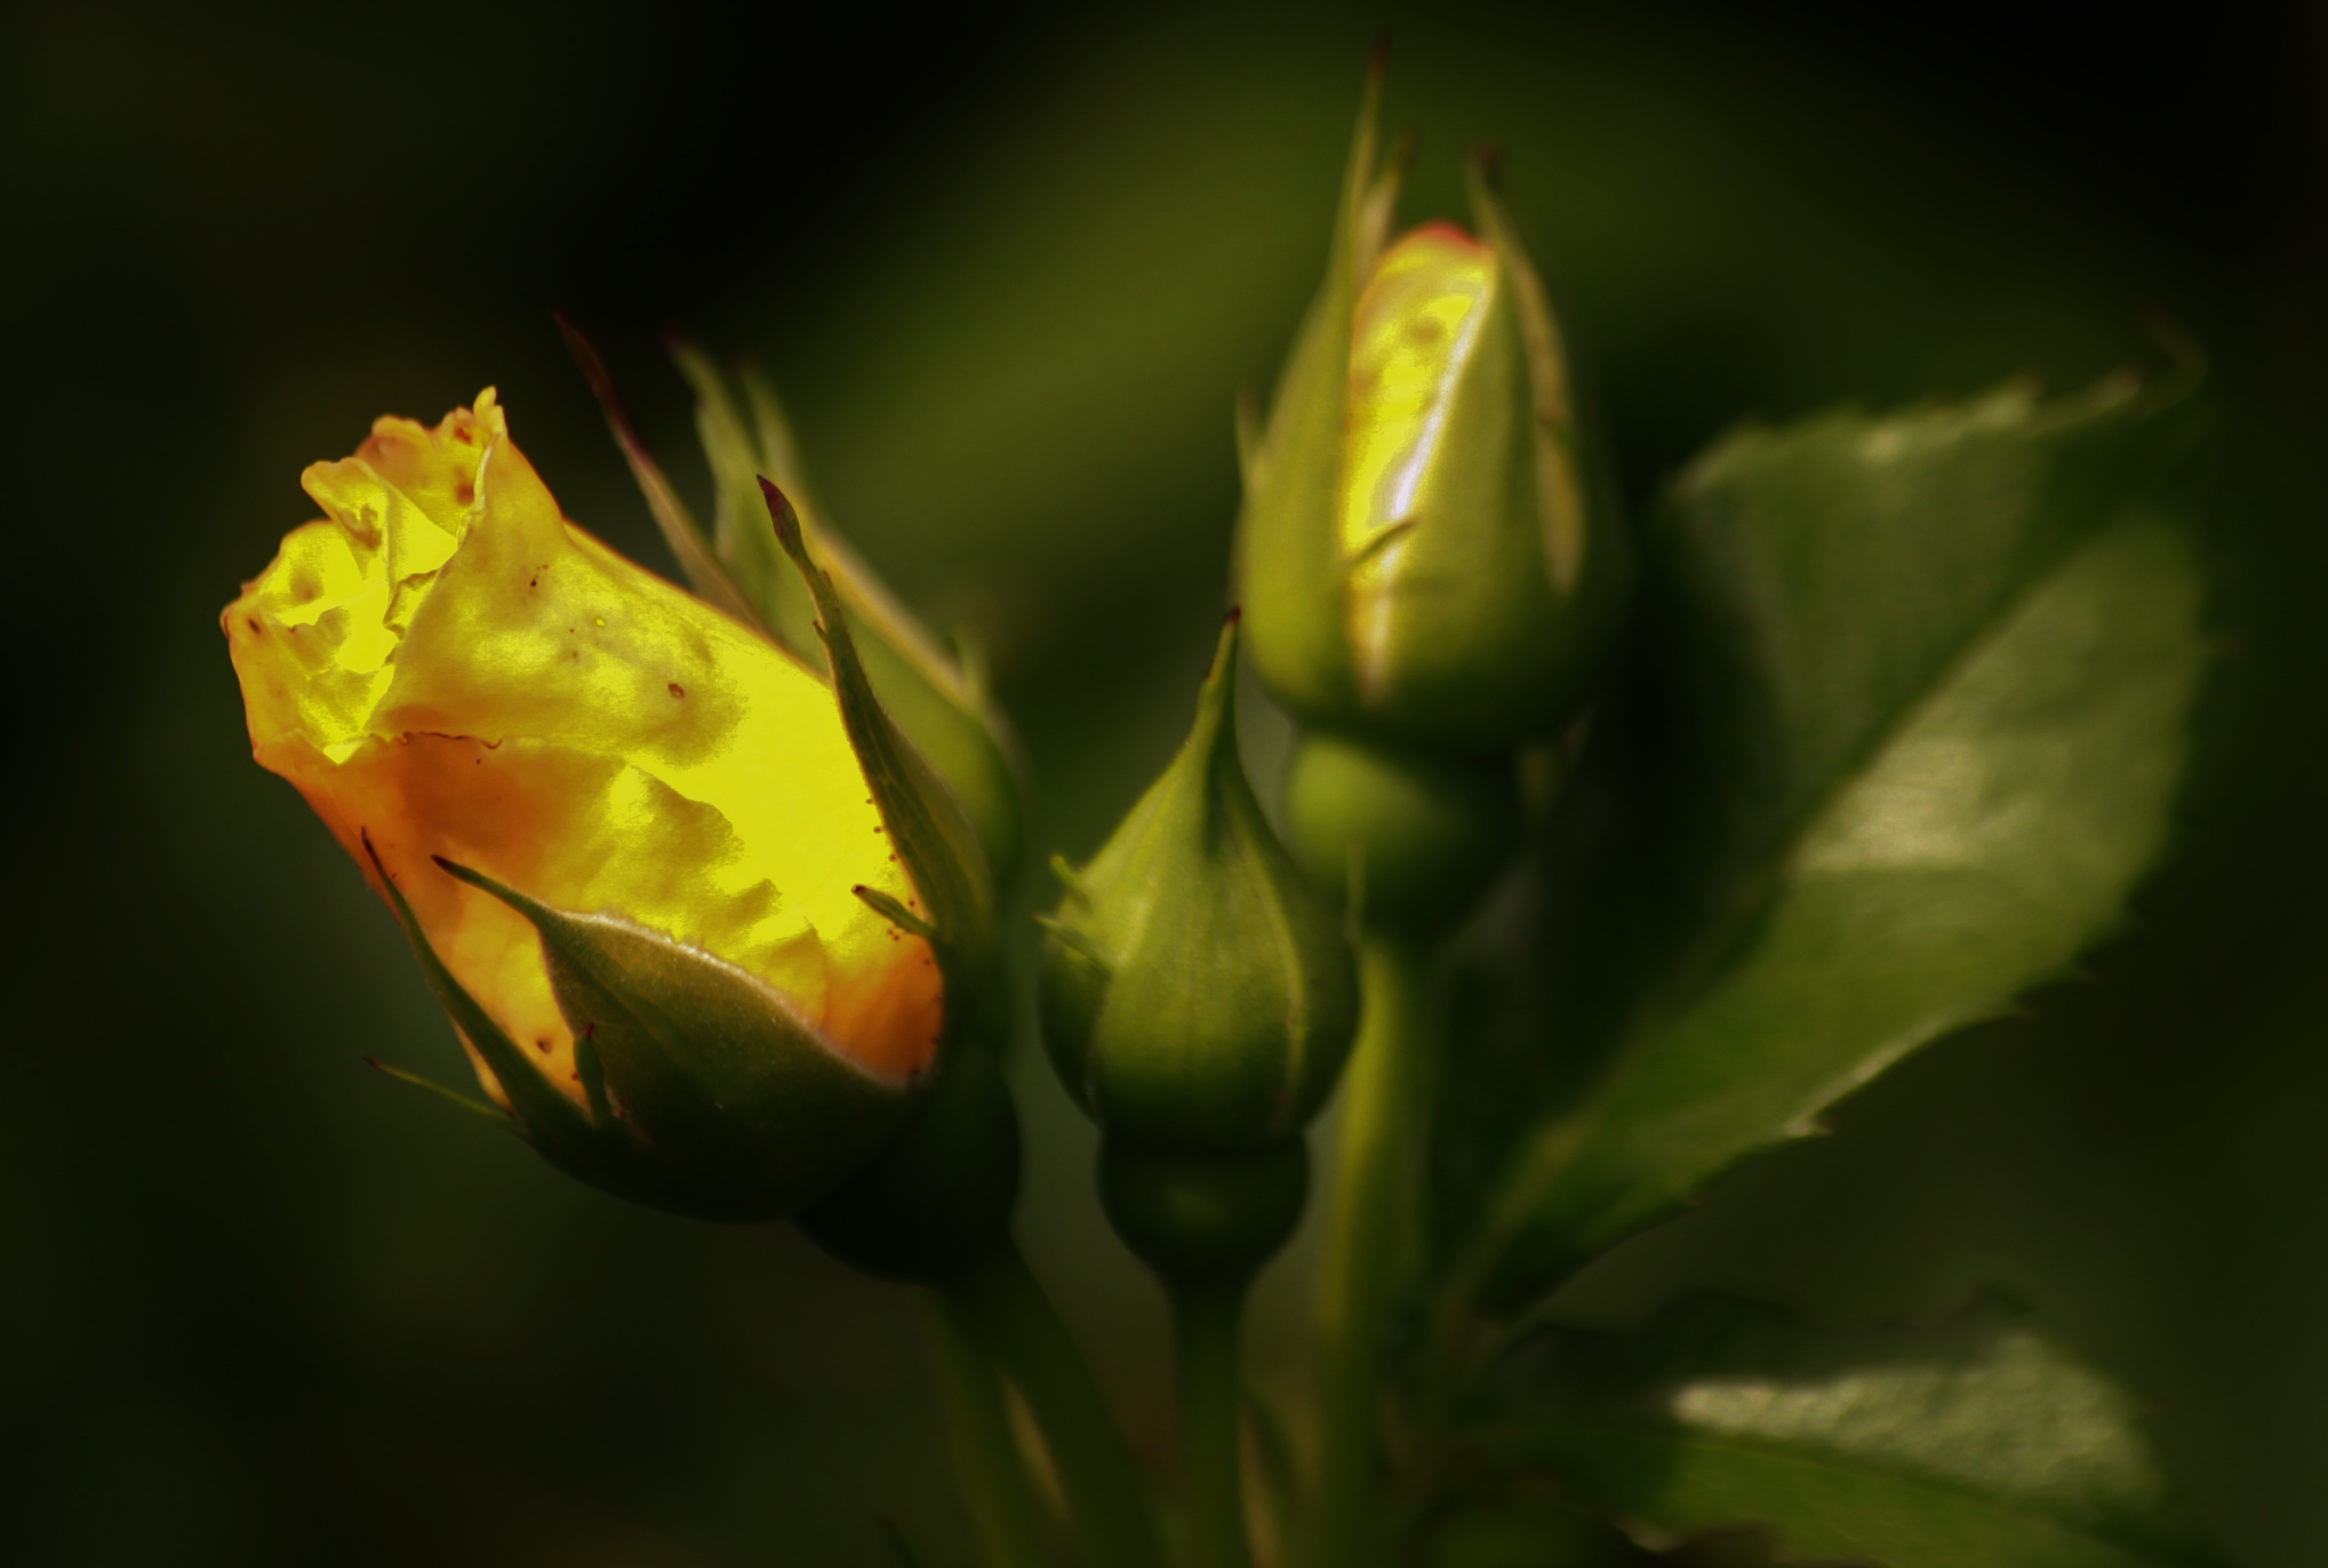 3840x2160 Wallpaper Yellow Rose Bud About To Bloom On Close Up